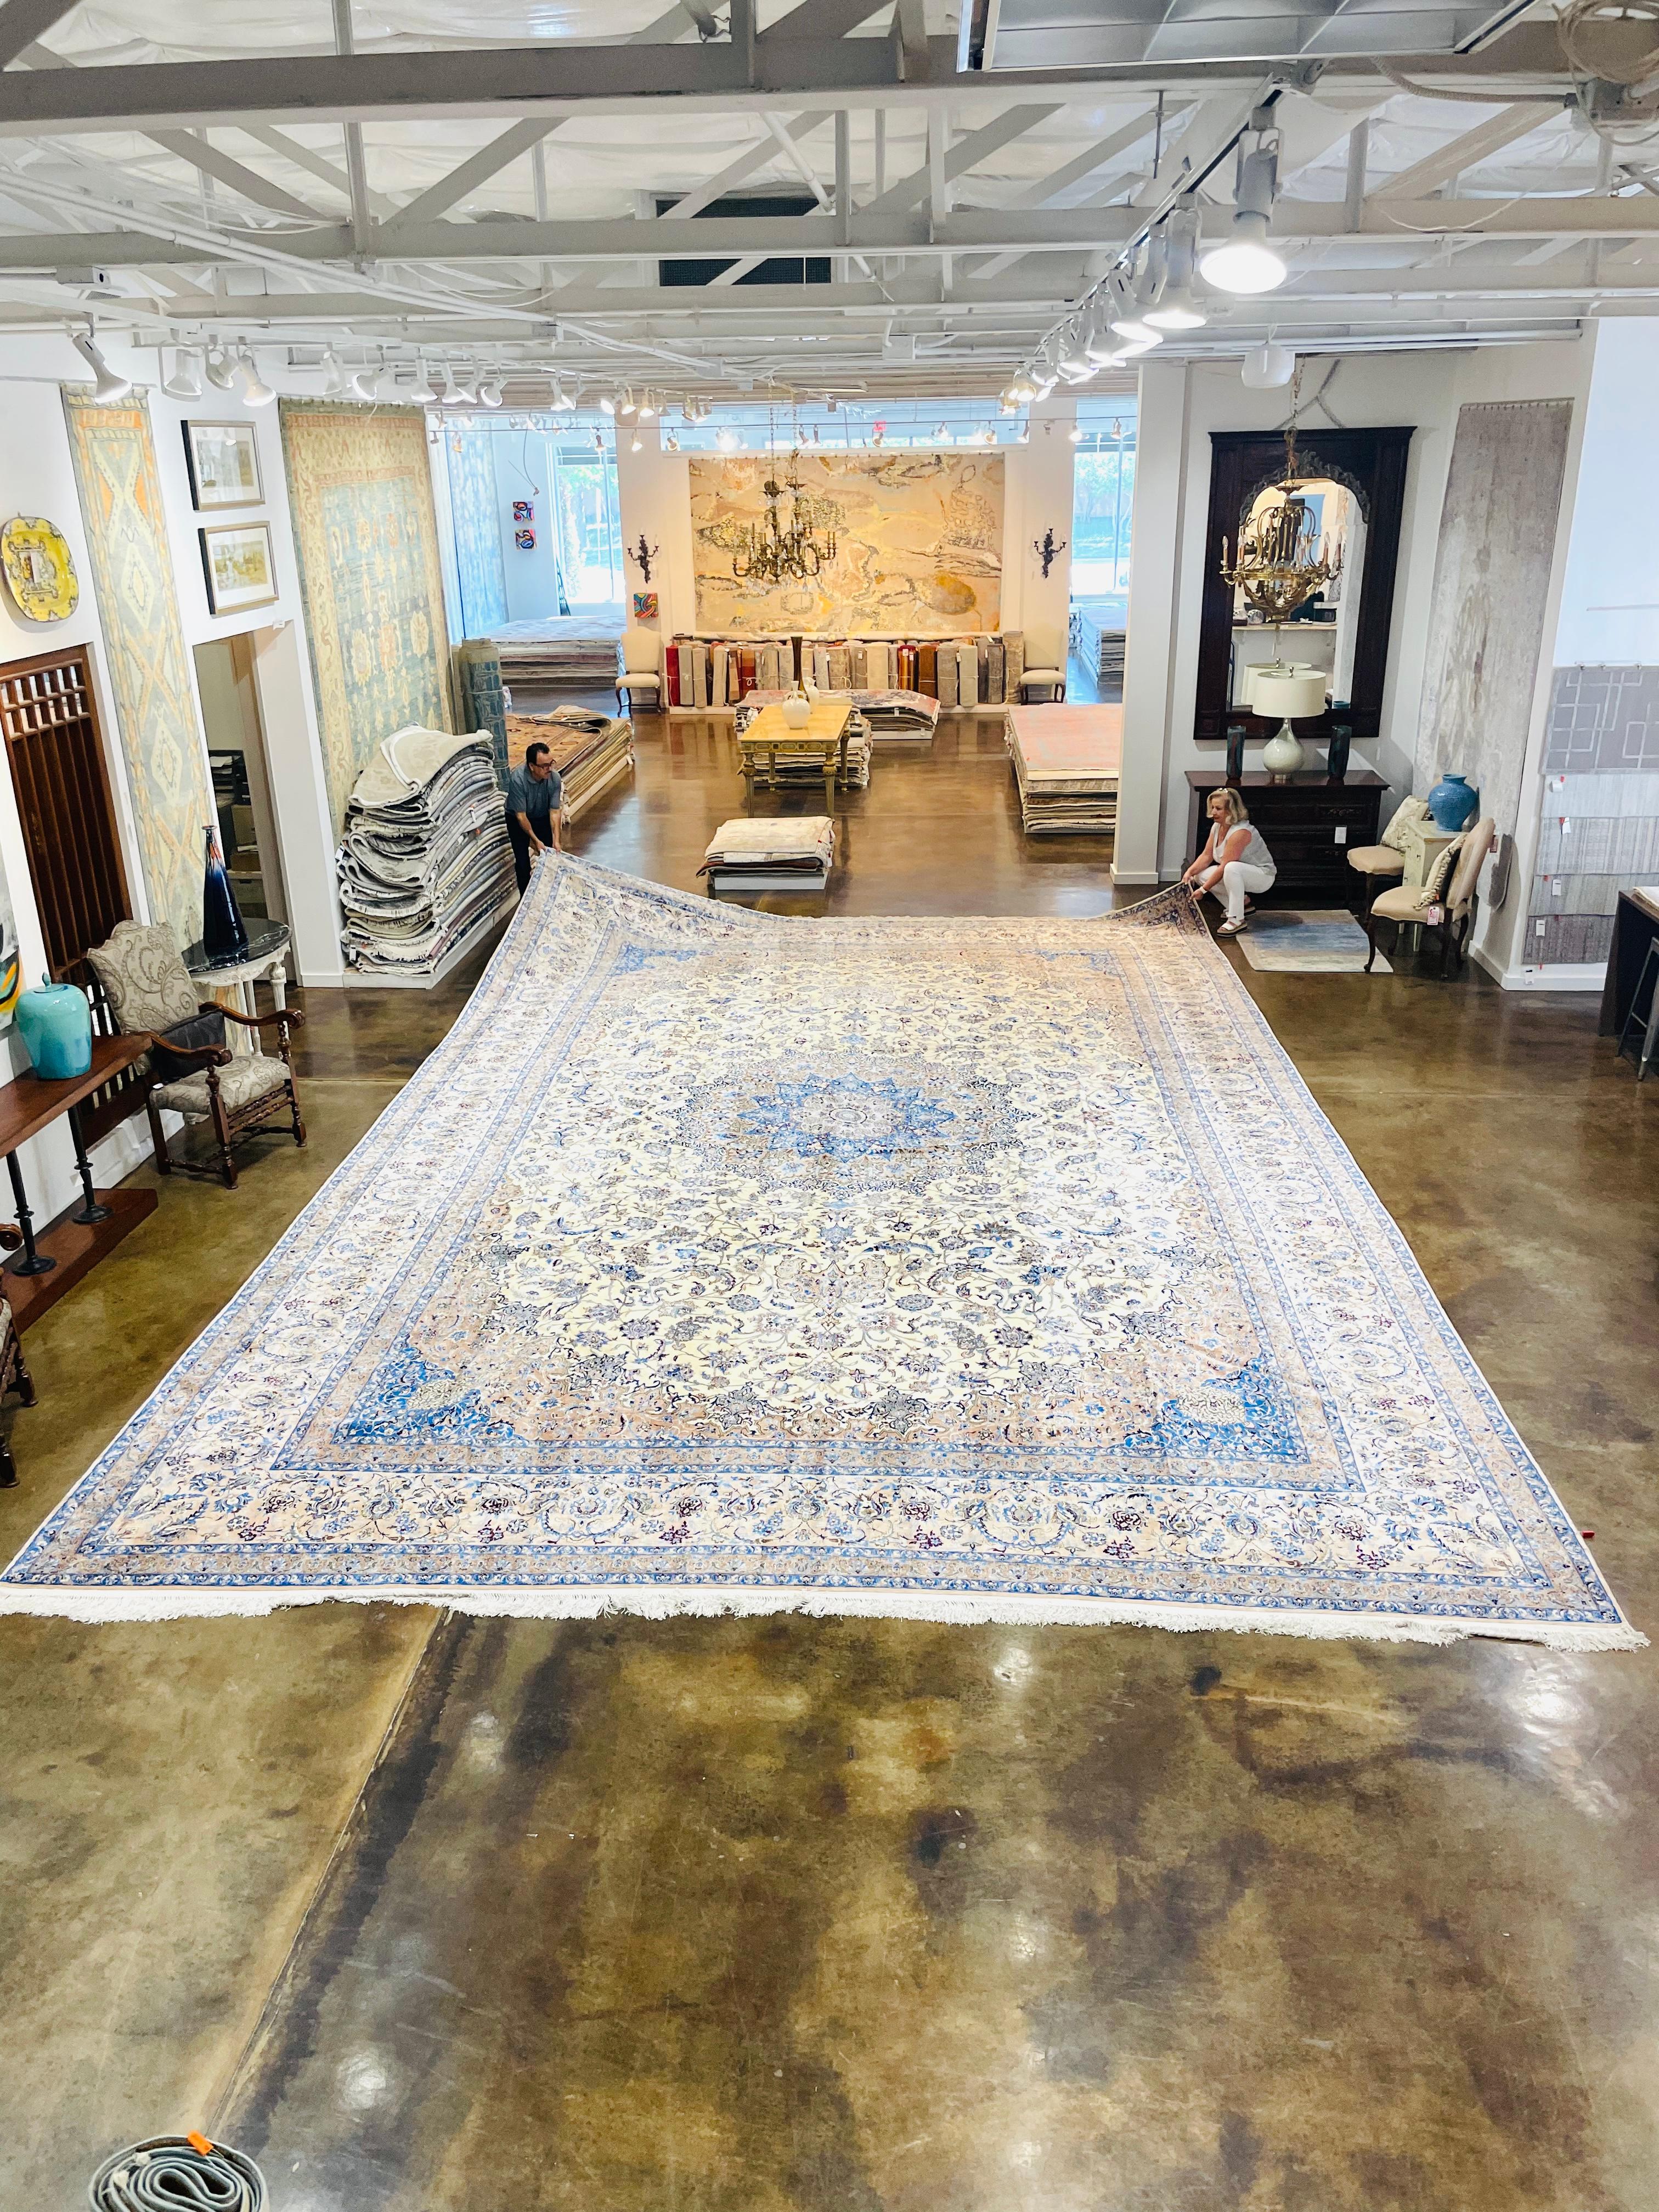 This beautiful palace size (17.1' x 27') Nain Persian rug is woven using a delicate color palette, with shades of ivory, blue, and beige featured prominently in the floral motif and central medallion. This piece is a 10 year production, and is